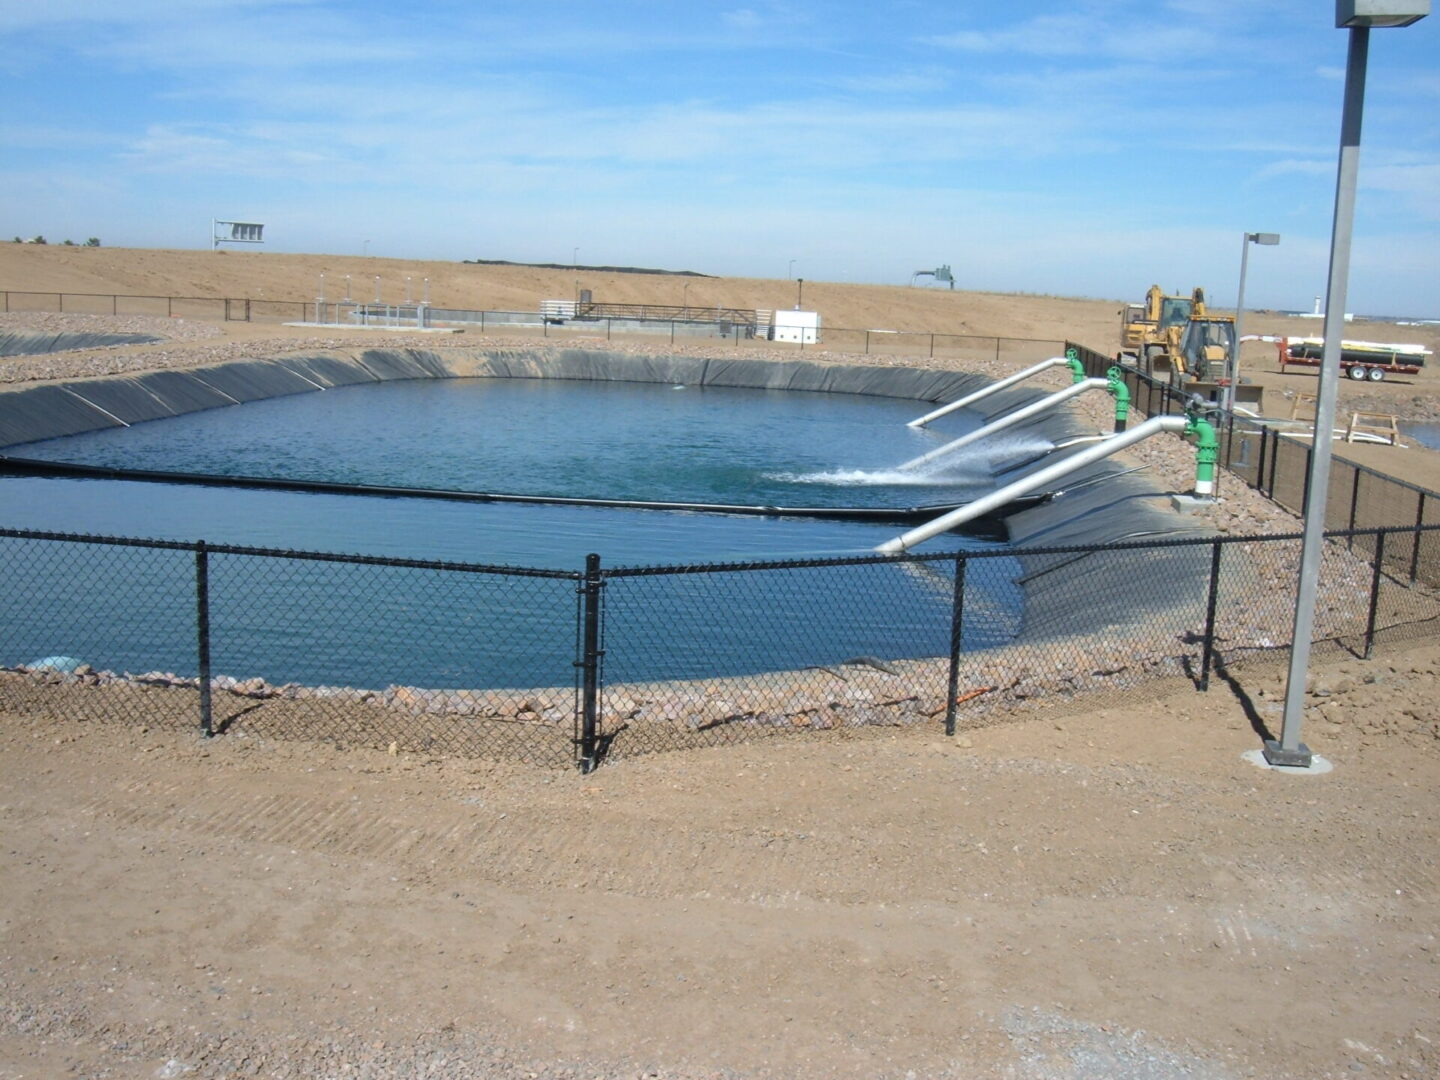 A large pool of water near a dirt field.